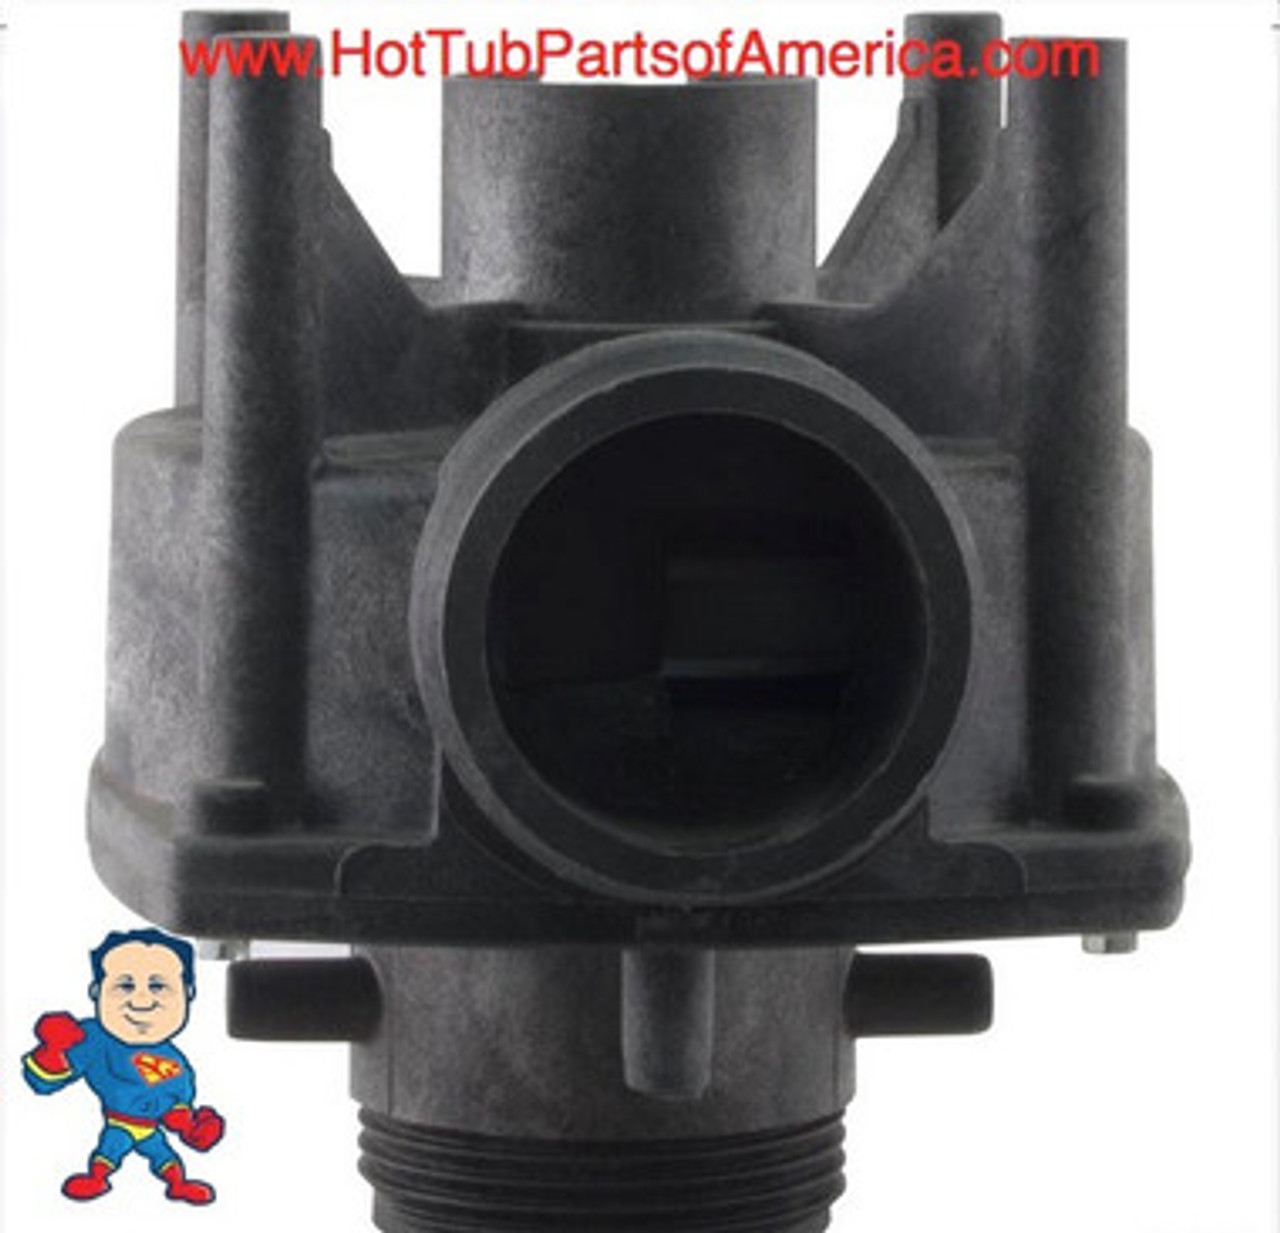 Note: We have a link in the description for a replacement wet end that will work since This Wet End is no longer available but we do have an alternative which is not an exact replacement but will work as long as your connecting plumbing is not rigid and can be move a little.. Meaning your pump is plumbed with flexible pipe so the union connections can be adjusted..


Wet End,Bath, Garden, Tub,  GG Mark III, 0.75hp, 1-1/2",mbt, 48fr 
The Threads are consider to be 1 1/2" which would measure about 2 3/8" across the threads...